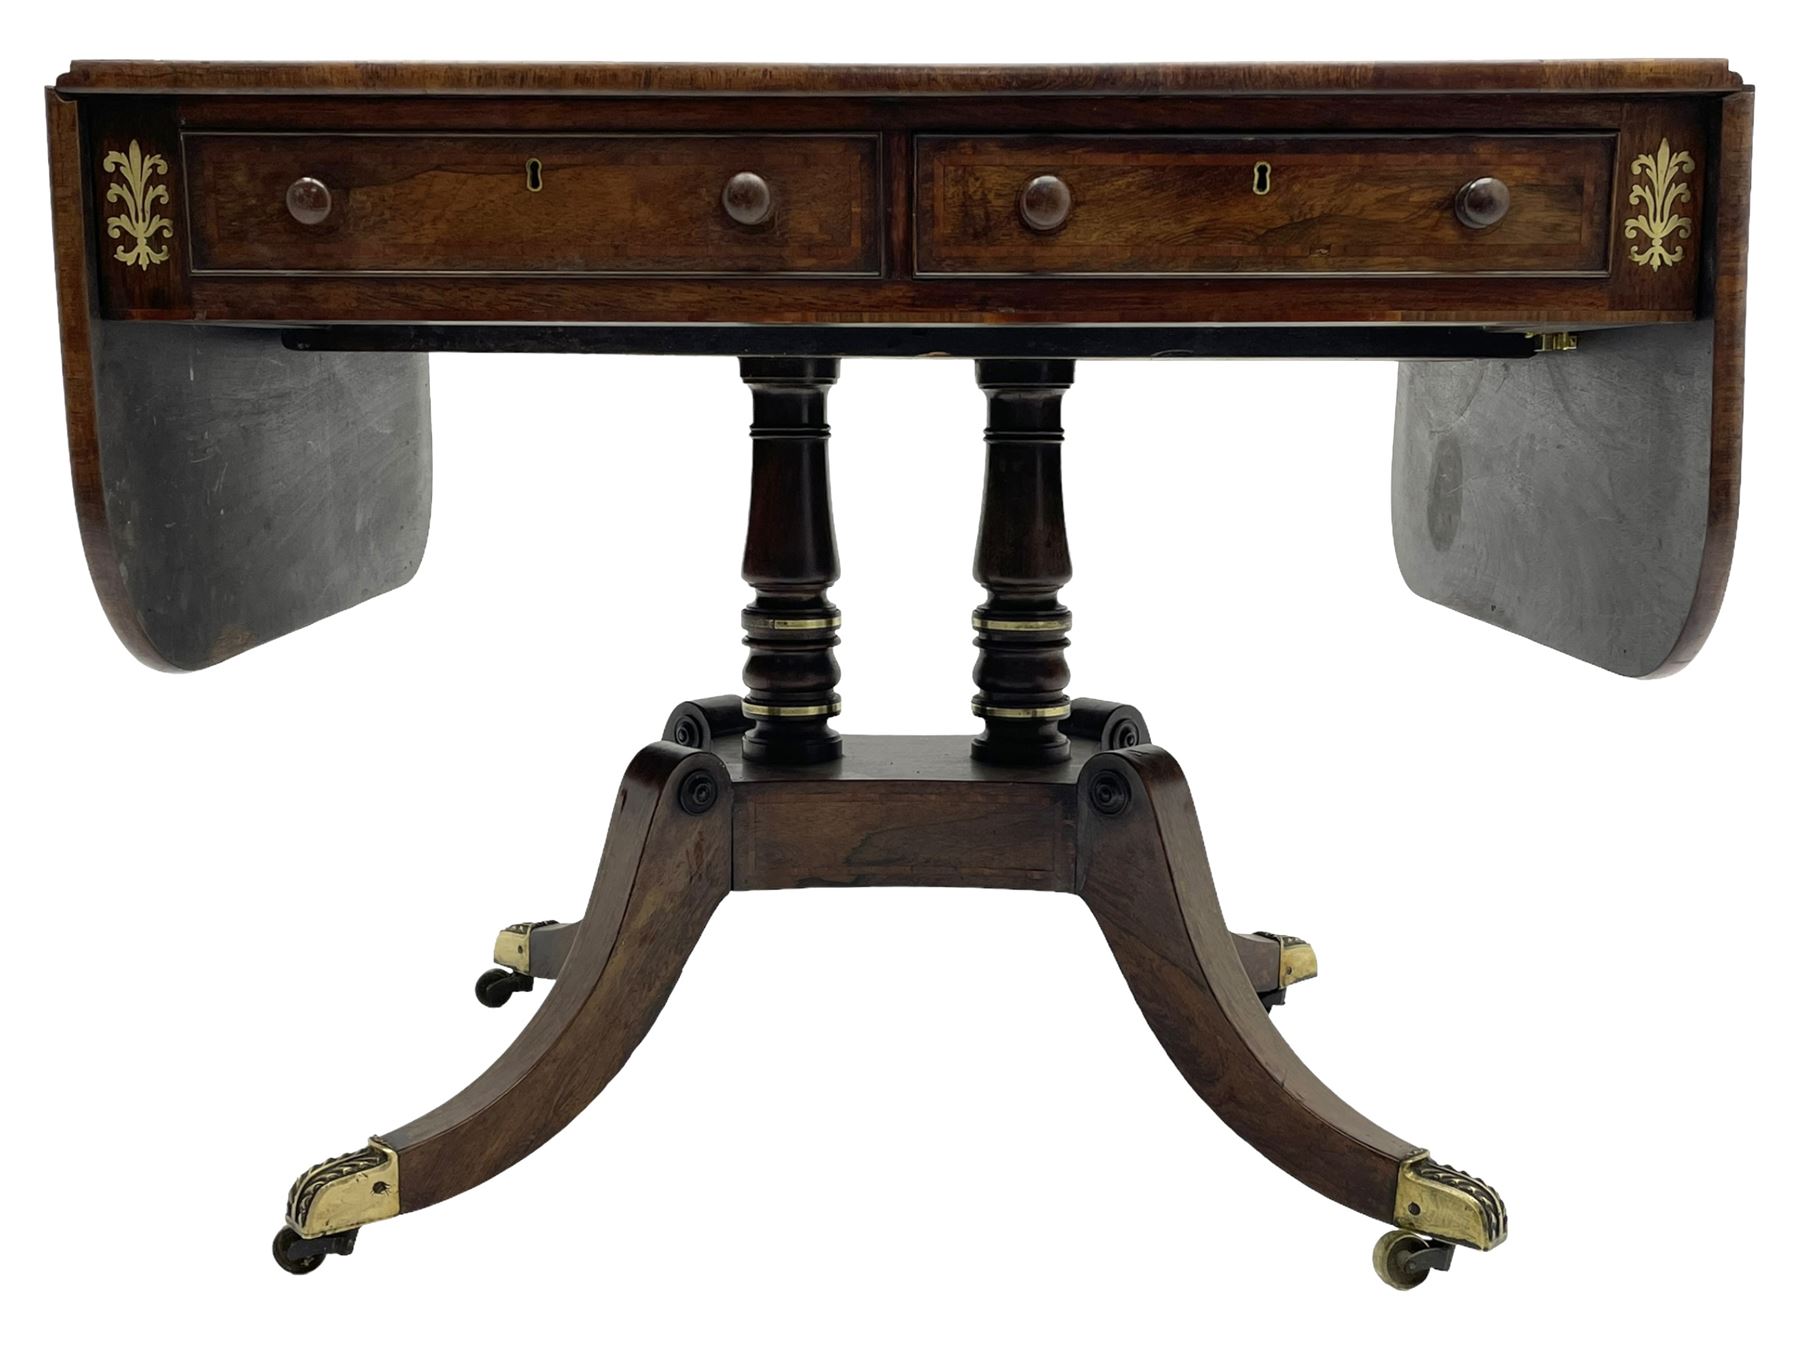 Regency rosewood and brass inlaid sofa table - Image 2 of 11